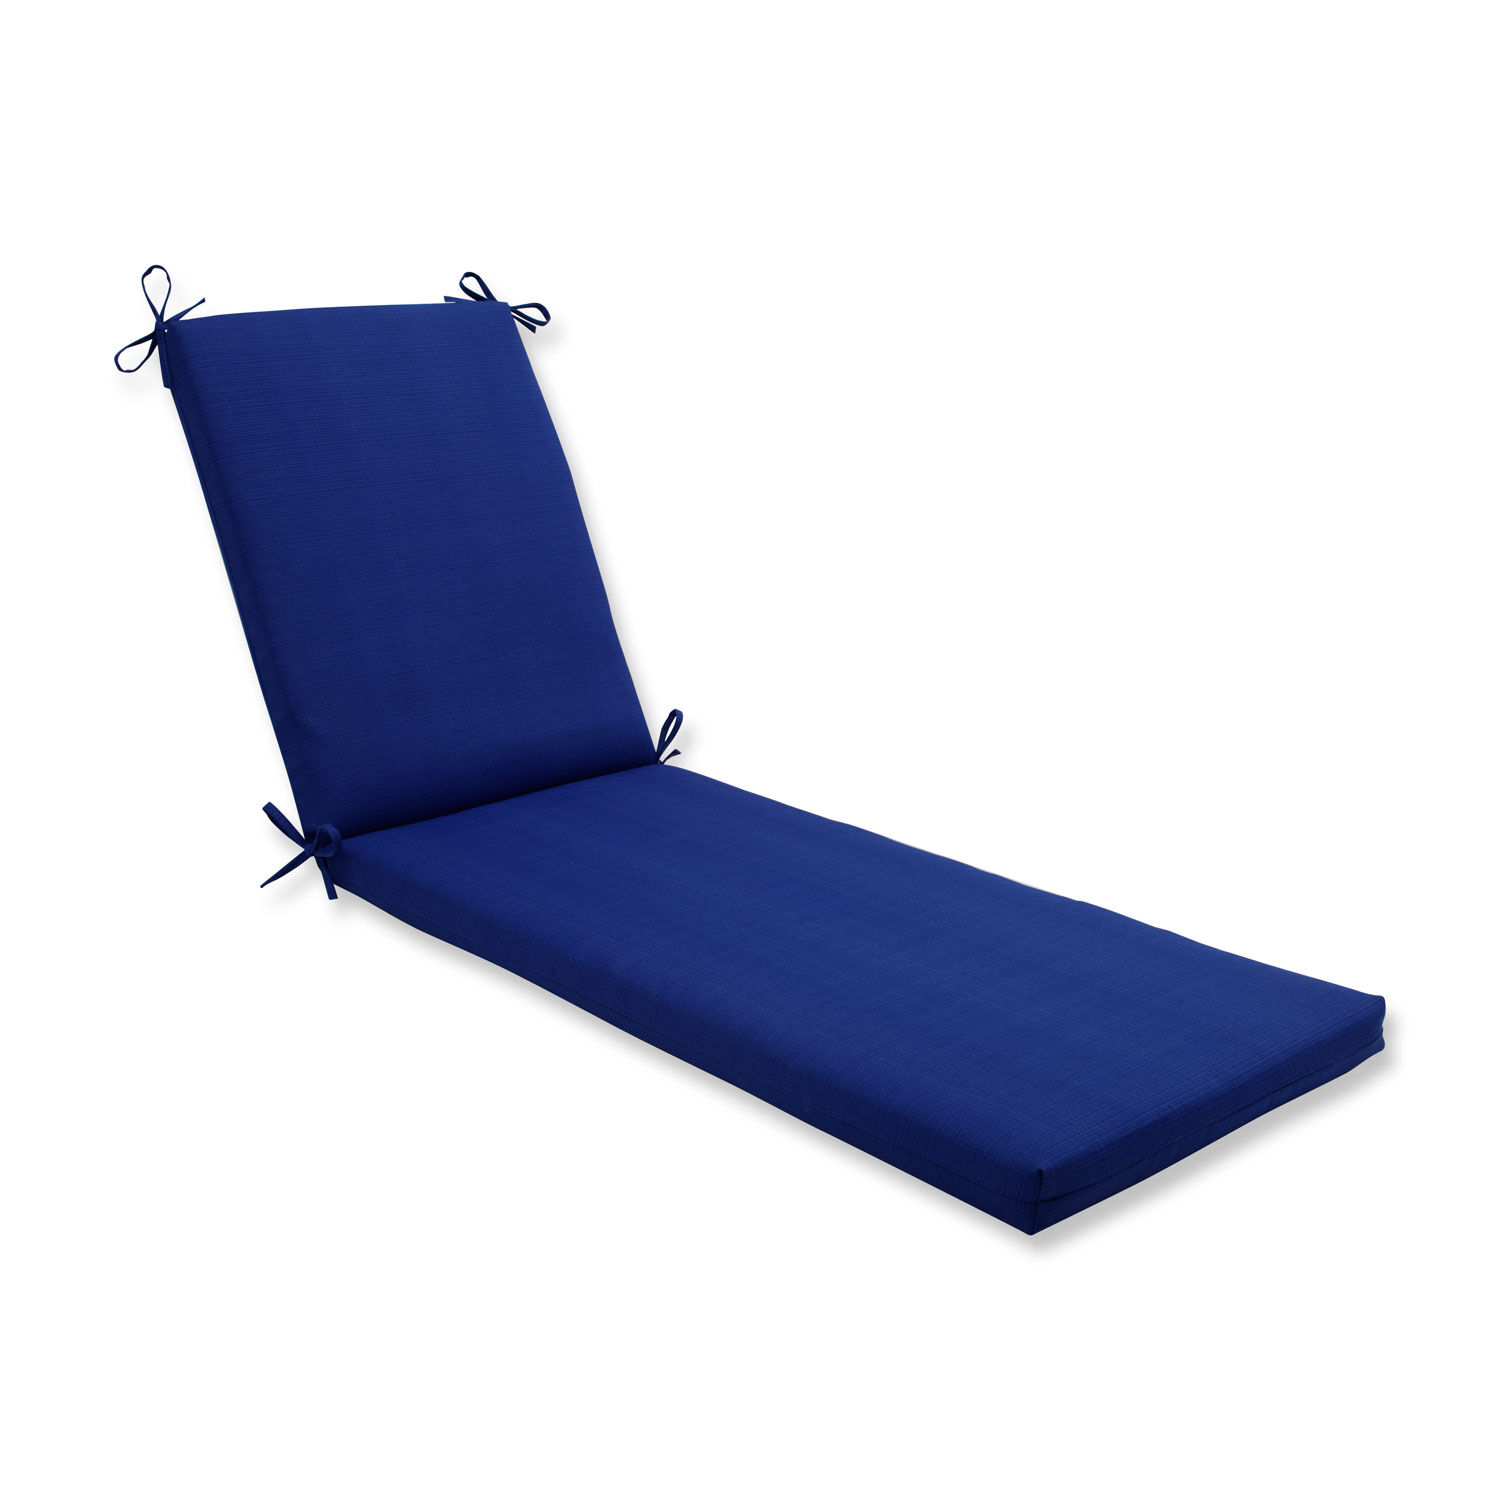 Pillow Perfect Outdoor/Indoor Gilford Baltic Chaise Lounge Cushion 80 x 23 Blue